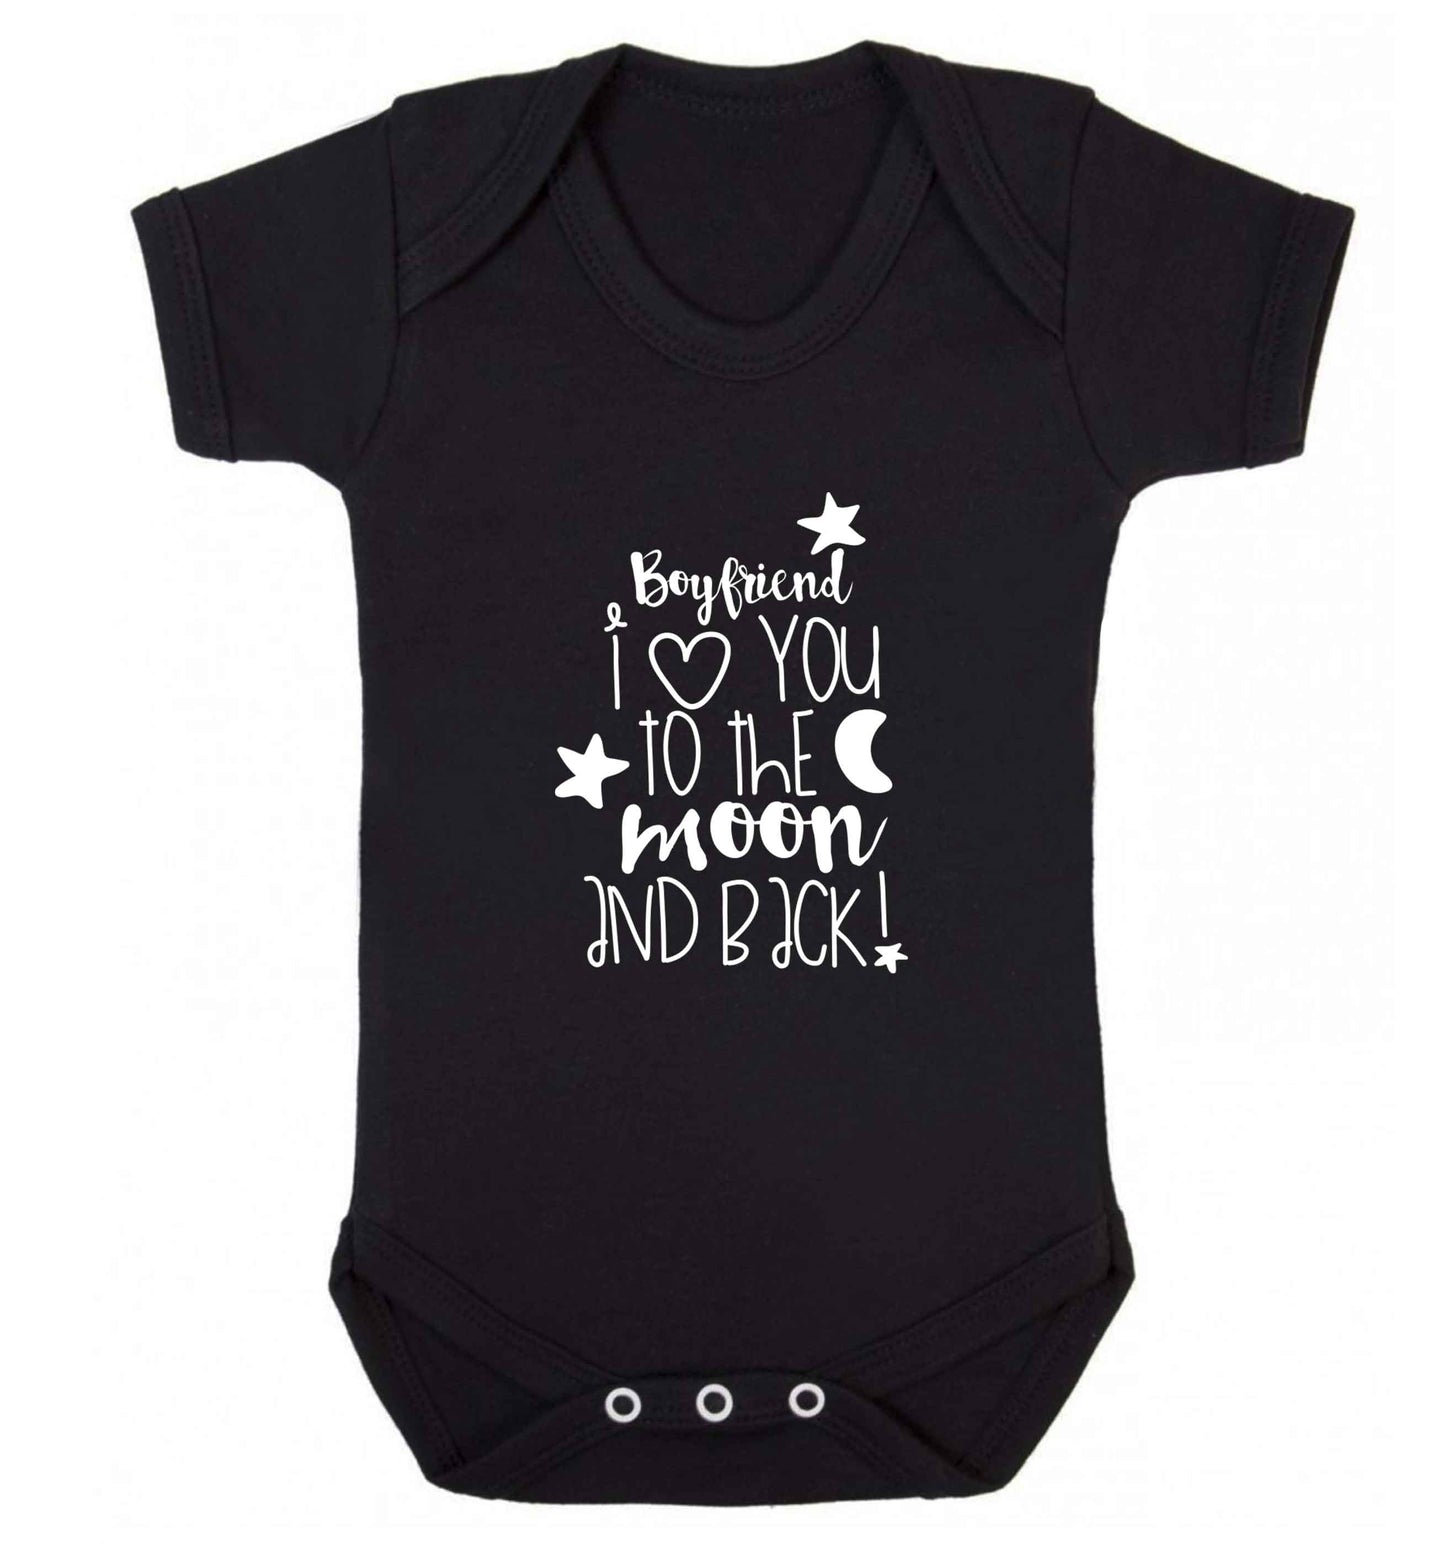 Boyfriend I love you to the moon and back baby vest black 18-24 months